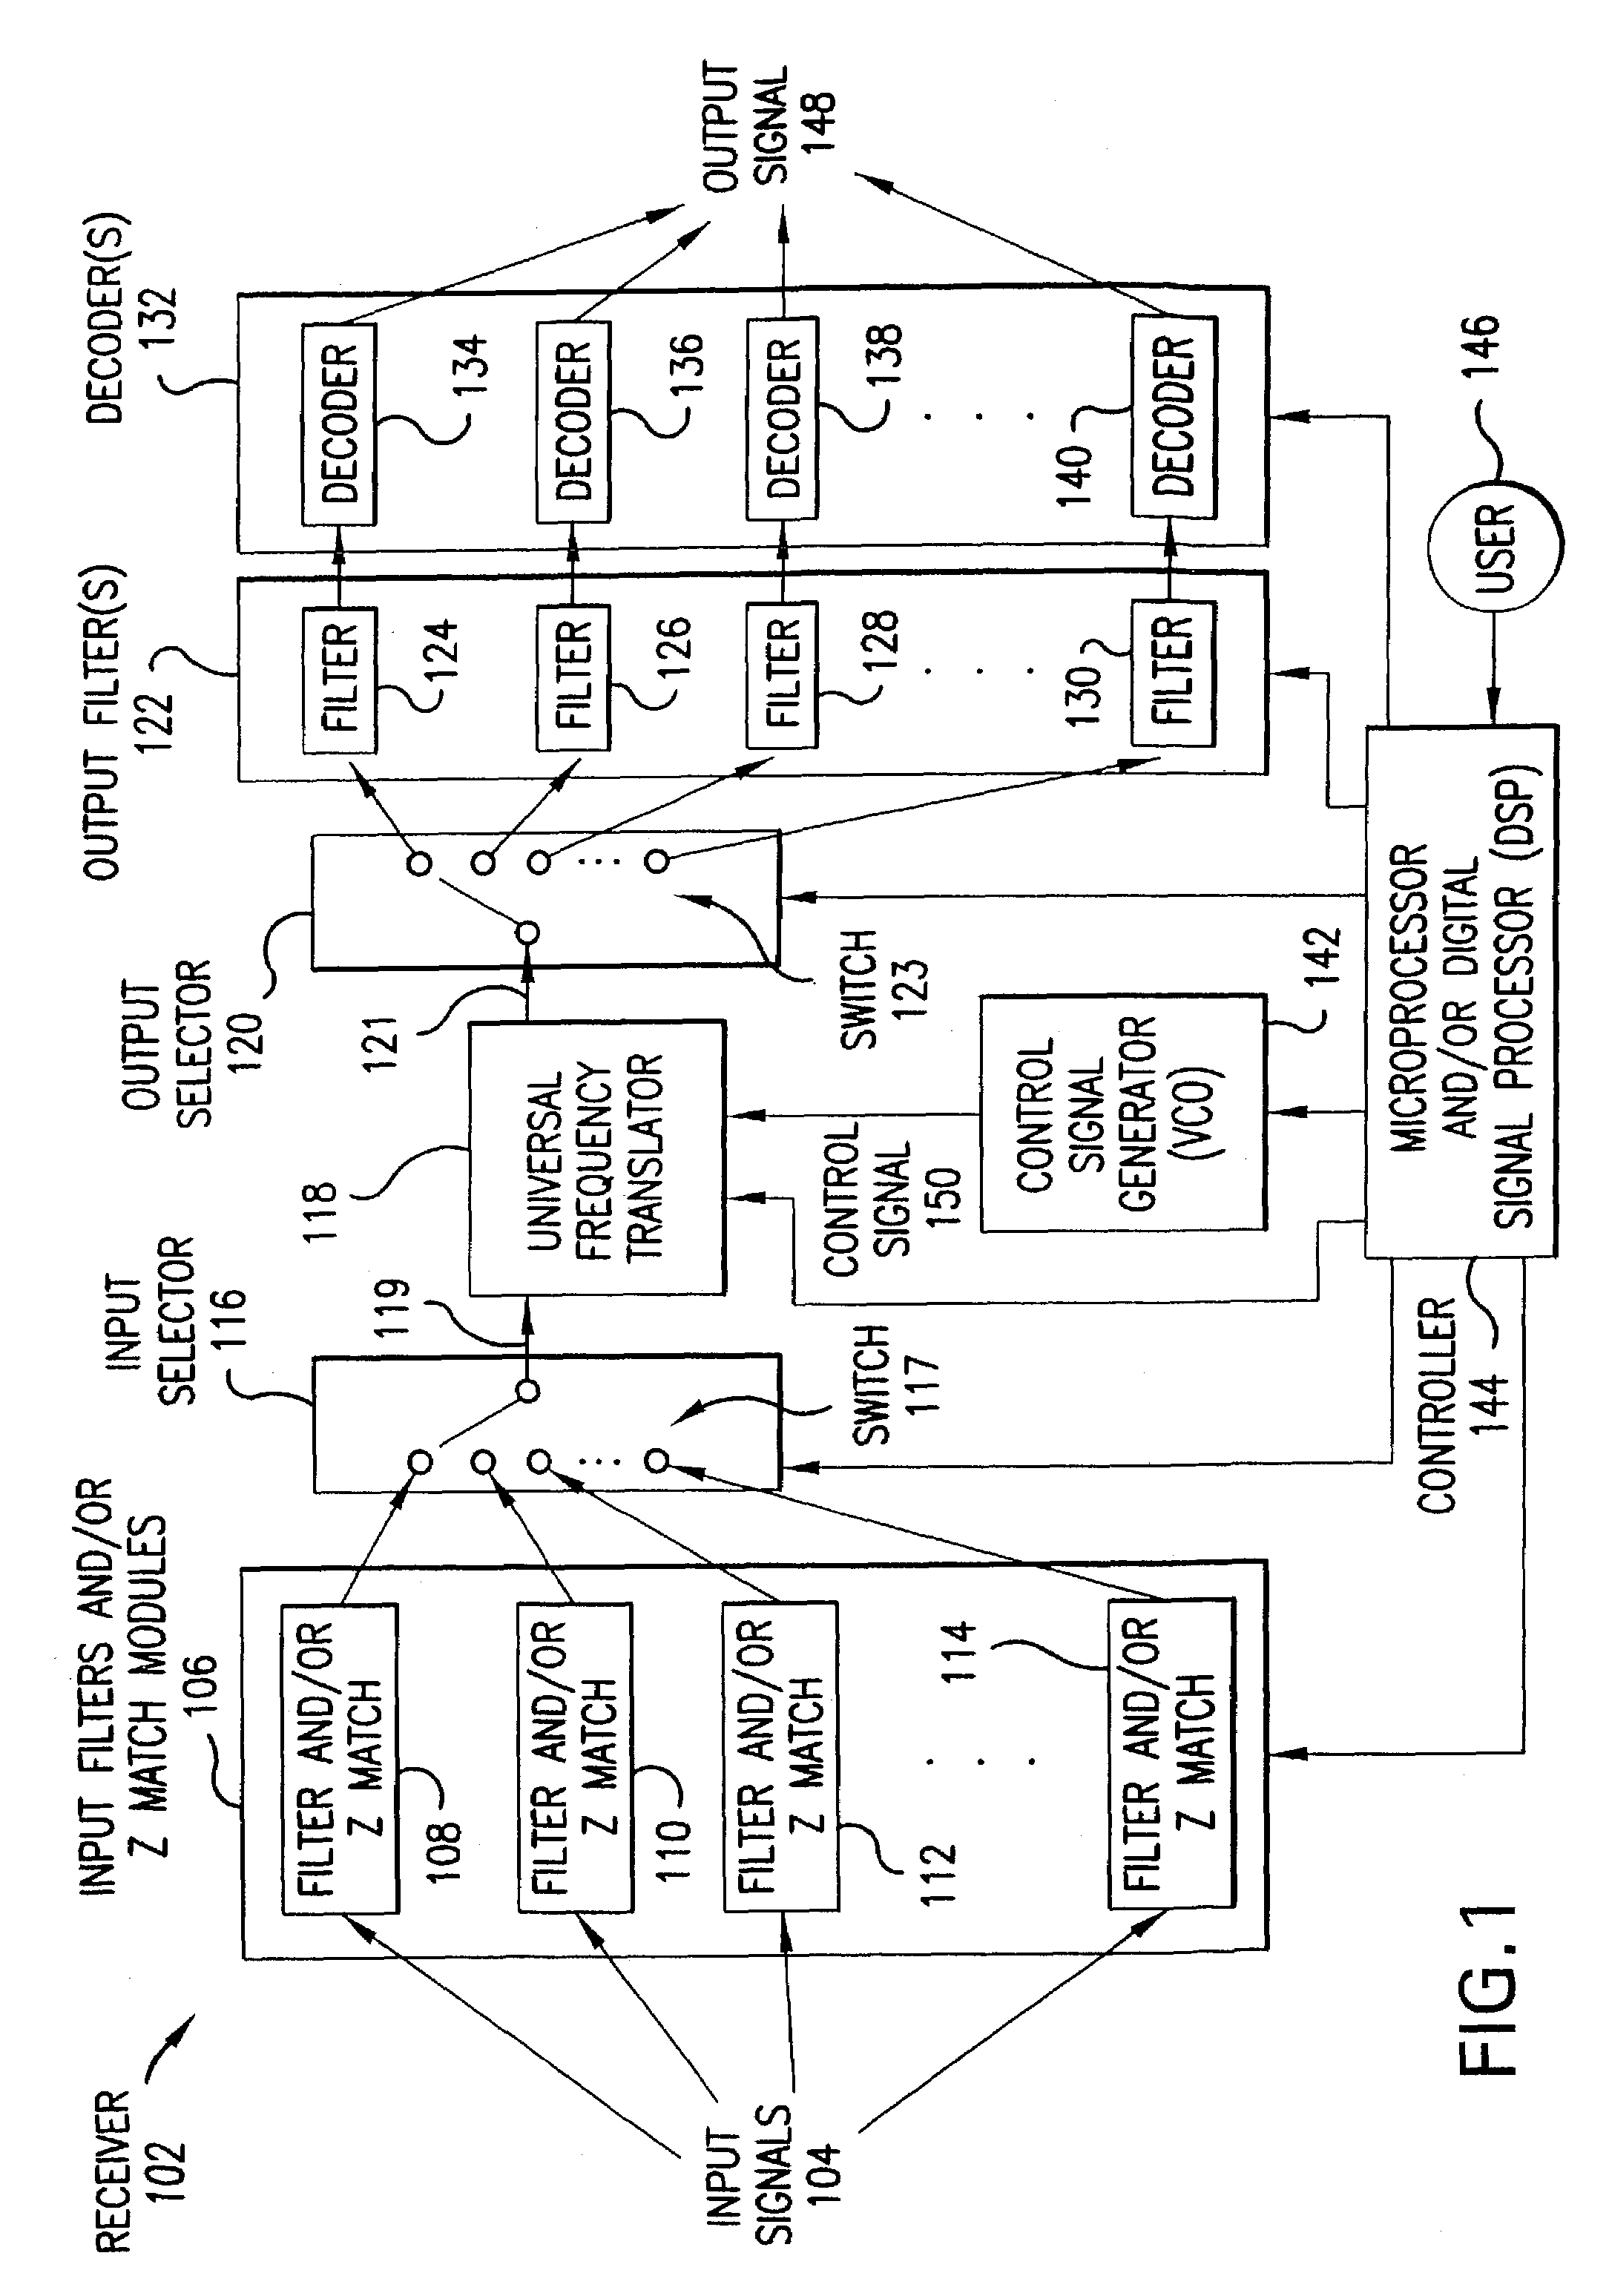 Aliasing communication system with multi-mode and multi-band functionality and embodiments thereof, such as the family radio service